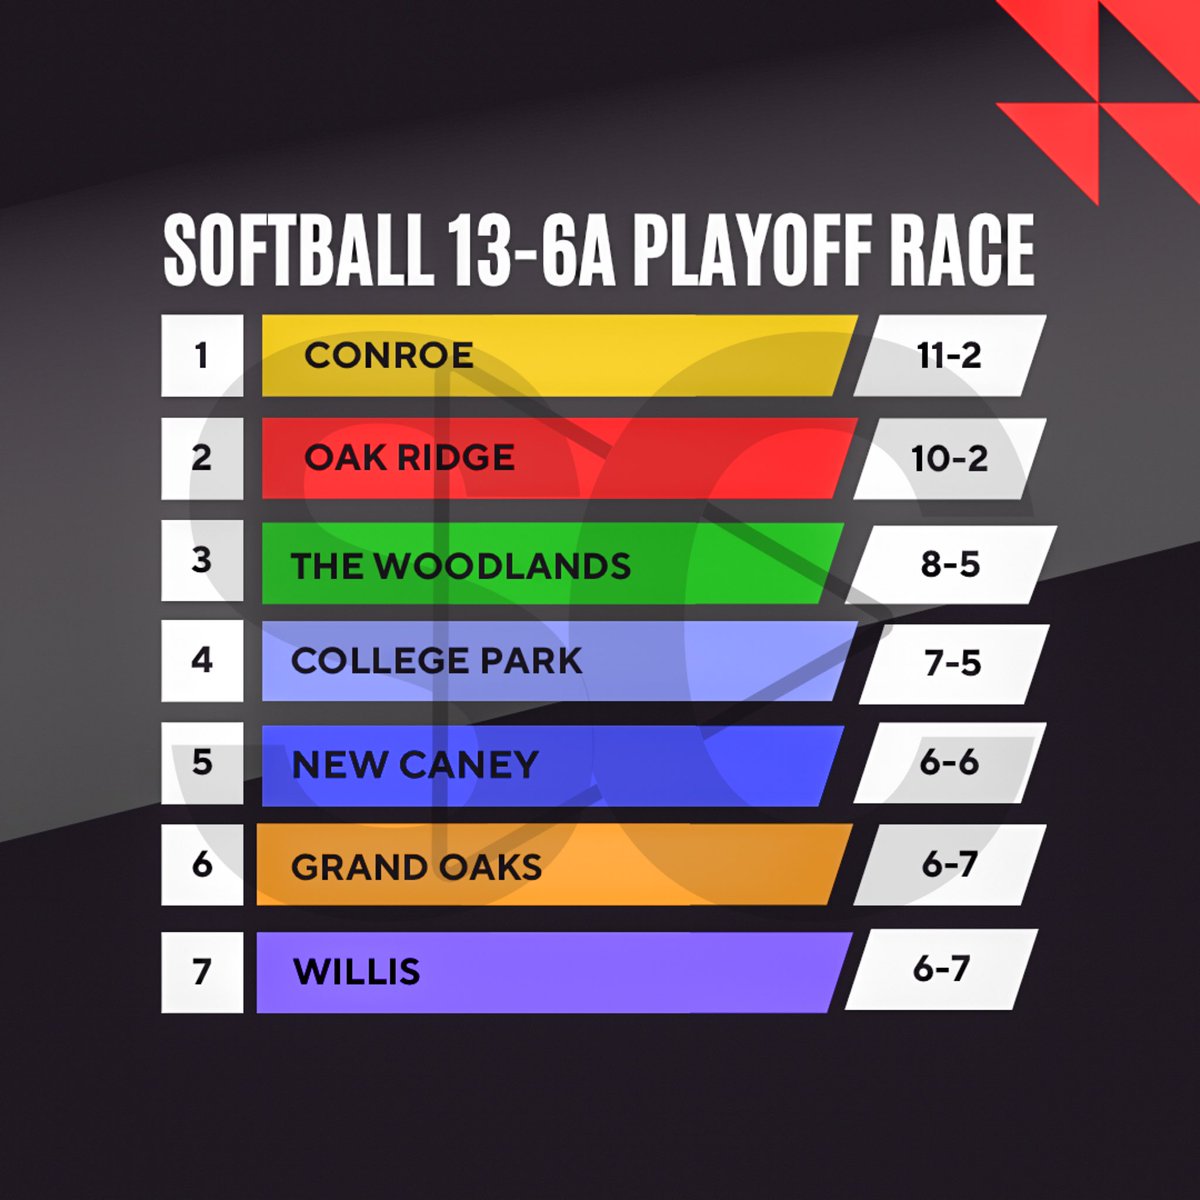 Here is the updated 13-6A playoff race standings‼️ Big games around the district tonight: New Caney at Grand Oaks 6:15pm The Woodlands at College Park 6:15pm Willis at Caney Creek 6pm Oak Ridge at Cleveland 6:15pm Conroe on bye